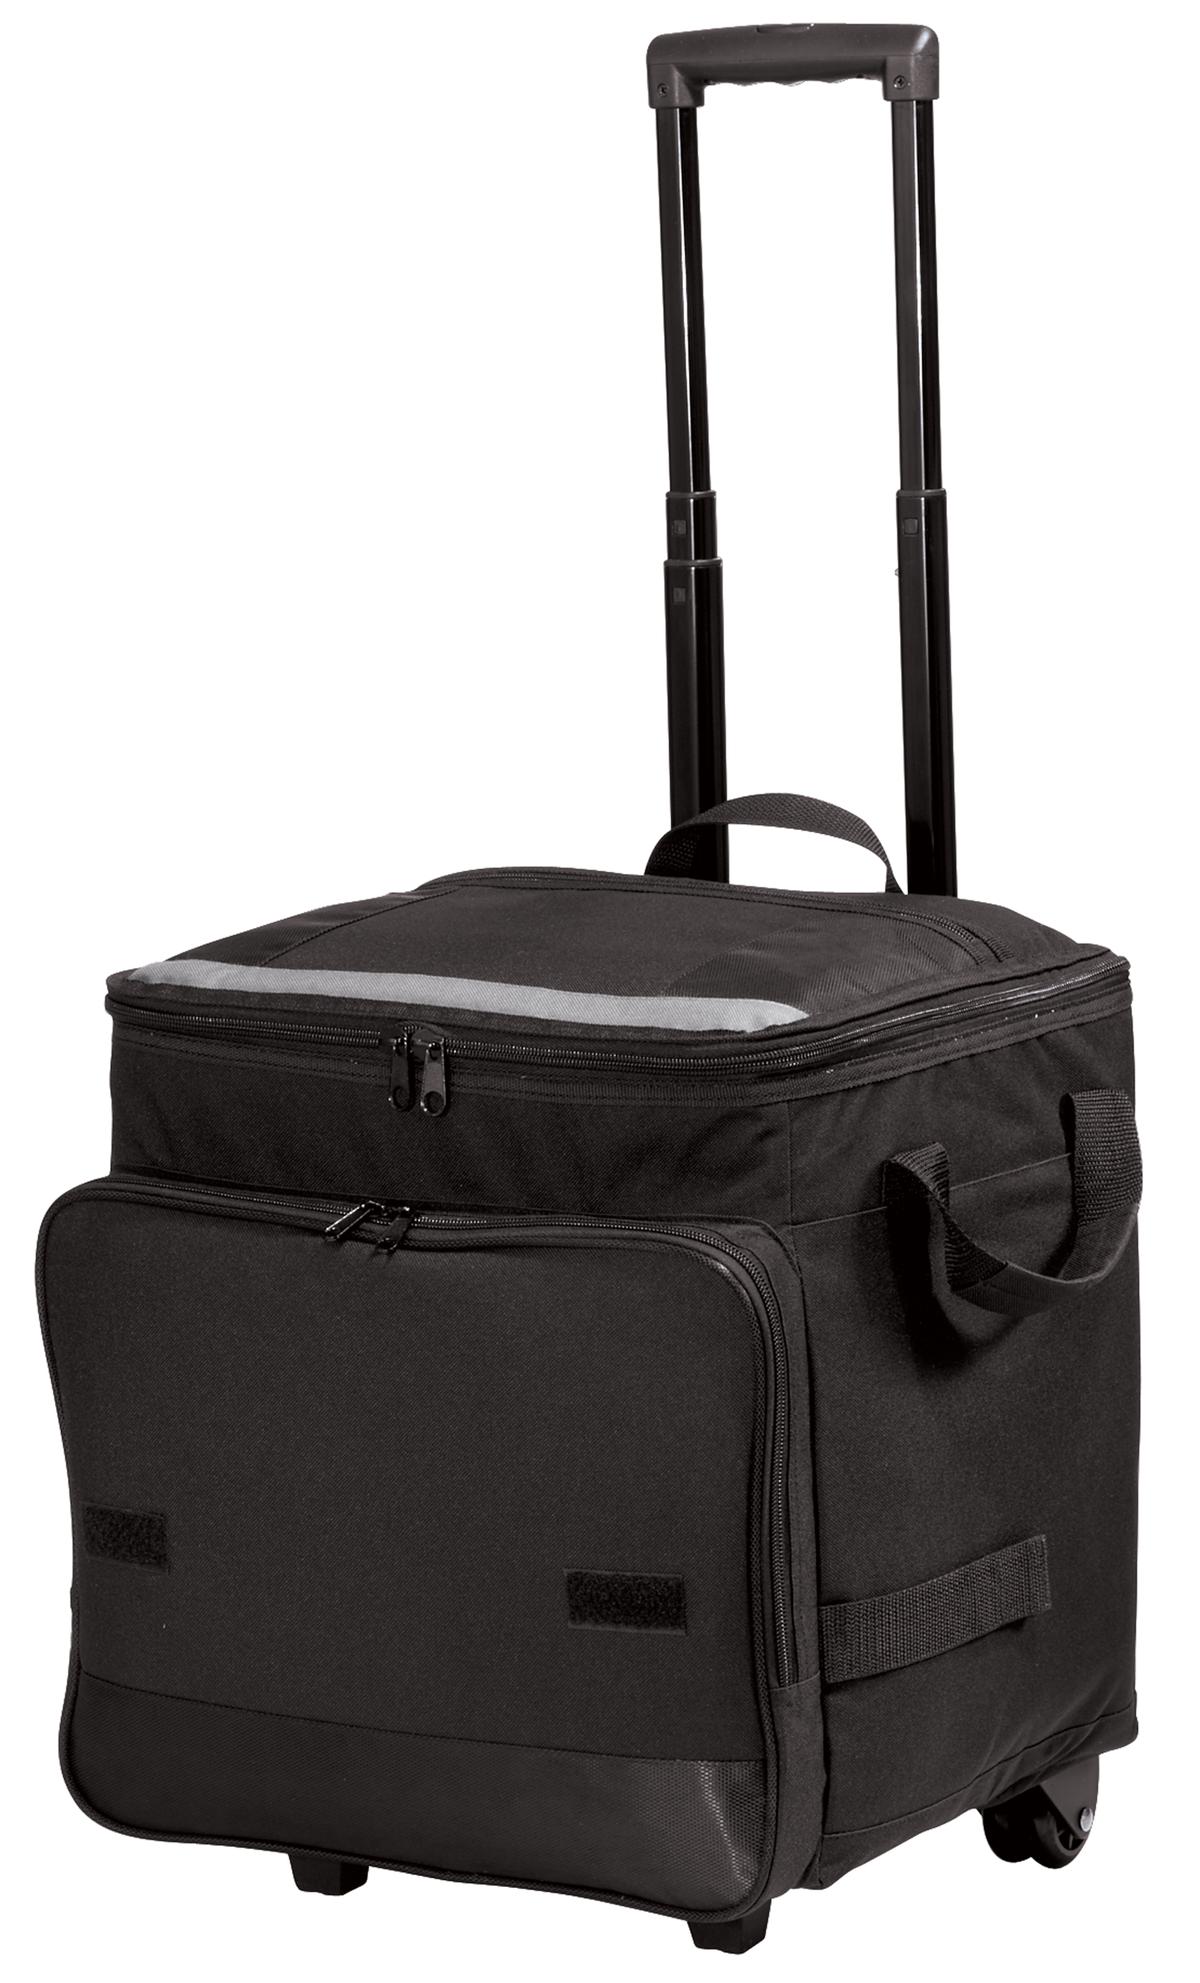 Port Authority Hospitality Bags ® Rolling Cooler.-Port Authority